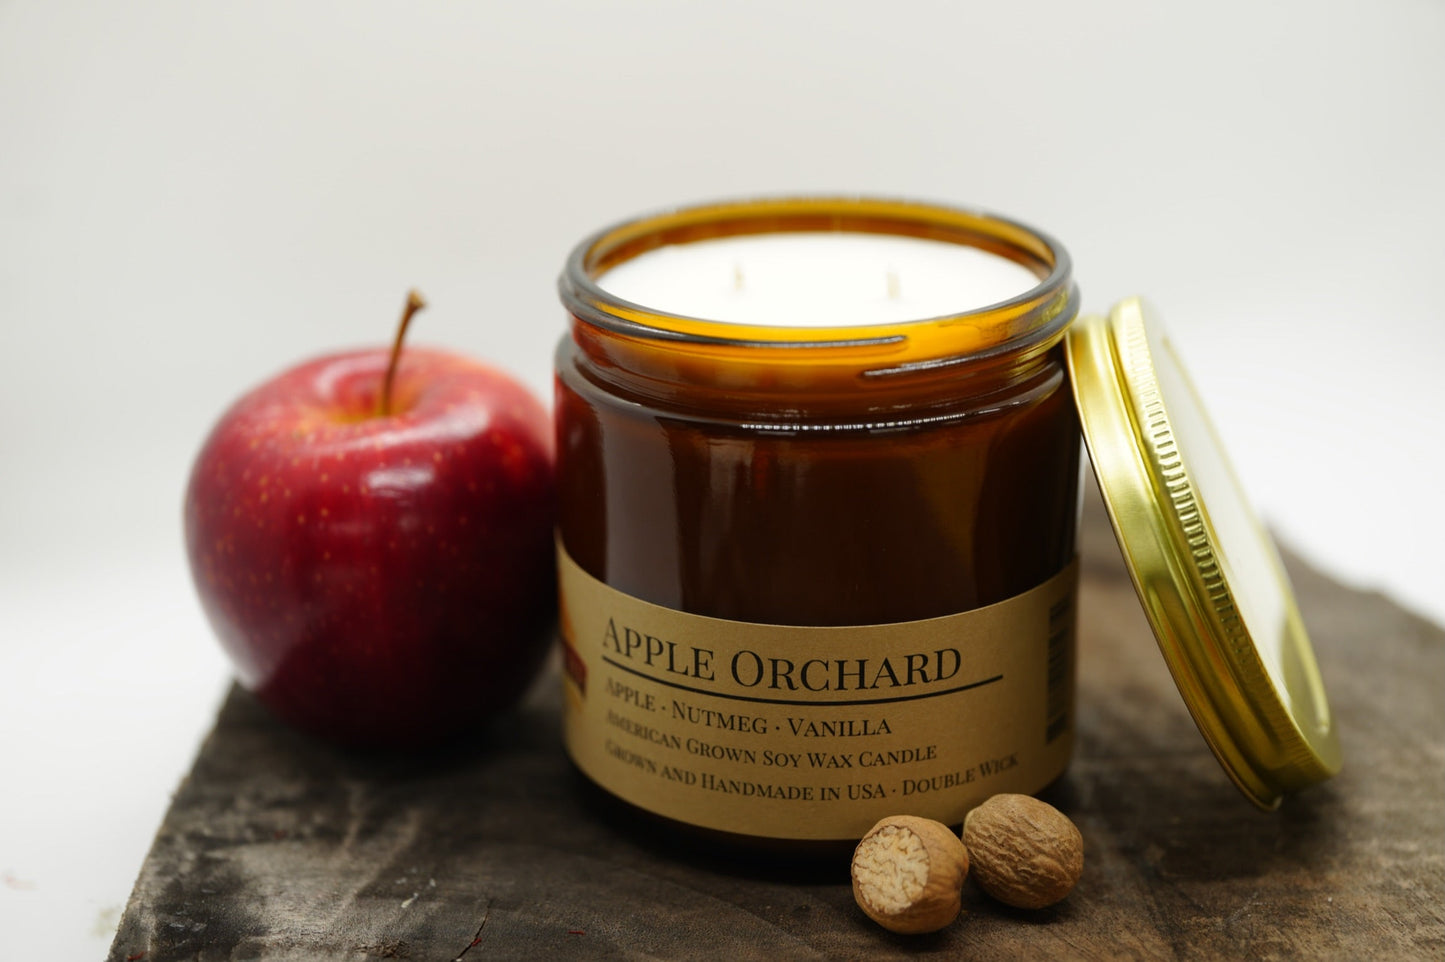 Apple Orchard Soy Candle | 16 oz Double Wick Amber Apothecary Jar